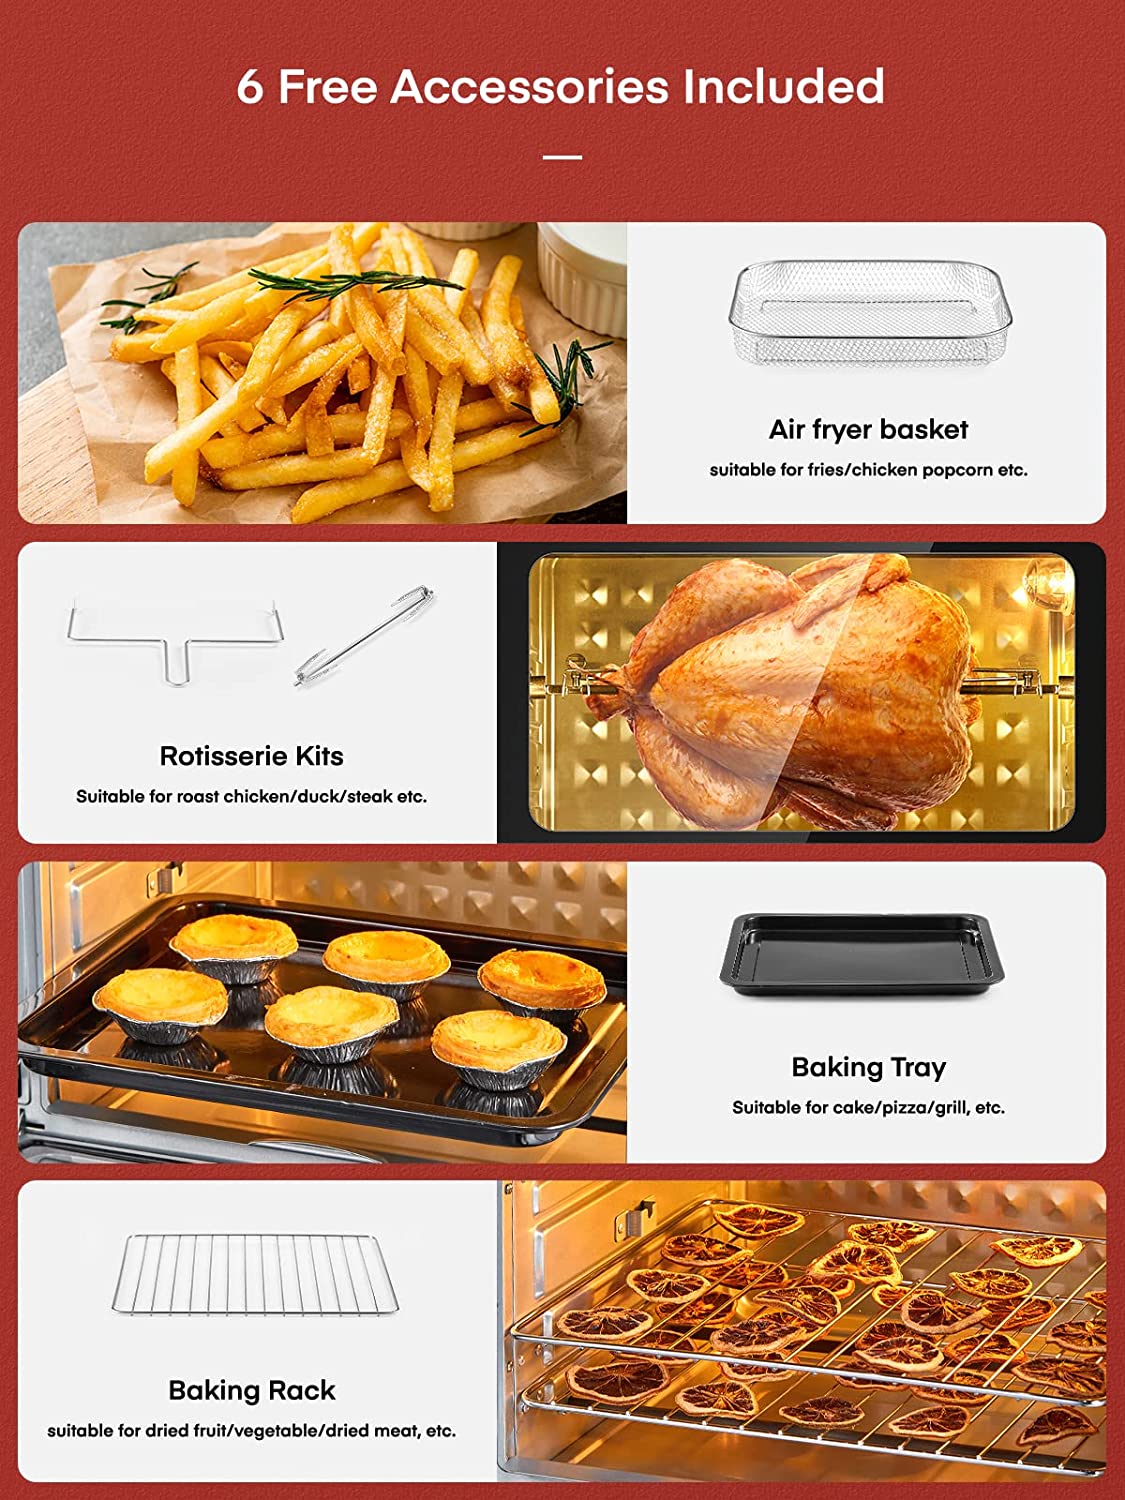 6 free accessories included, FOHERE Air Fryer Oven Combo, 6 Slice 24 QT Multi-function Convection Oven, 1700W Toaster Oven for Rotisserie, Dehydrate, Air Fry, Bake & Reheat, Fry Oil-Free, Non-Stick Inner, 6 Accessories & 100 Recipes